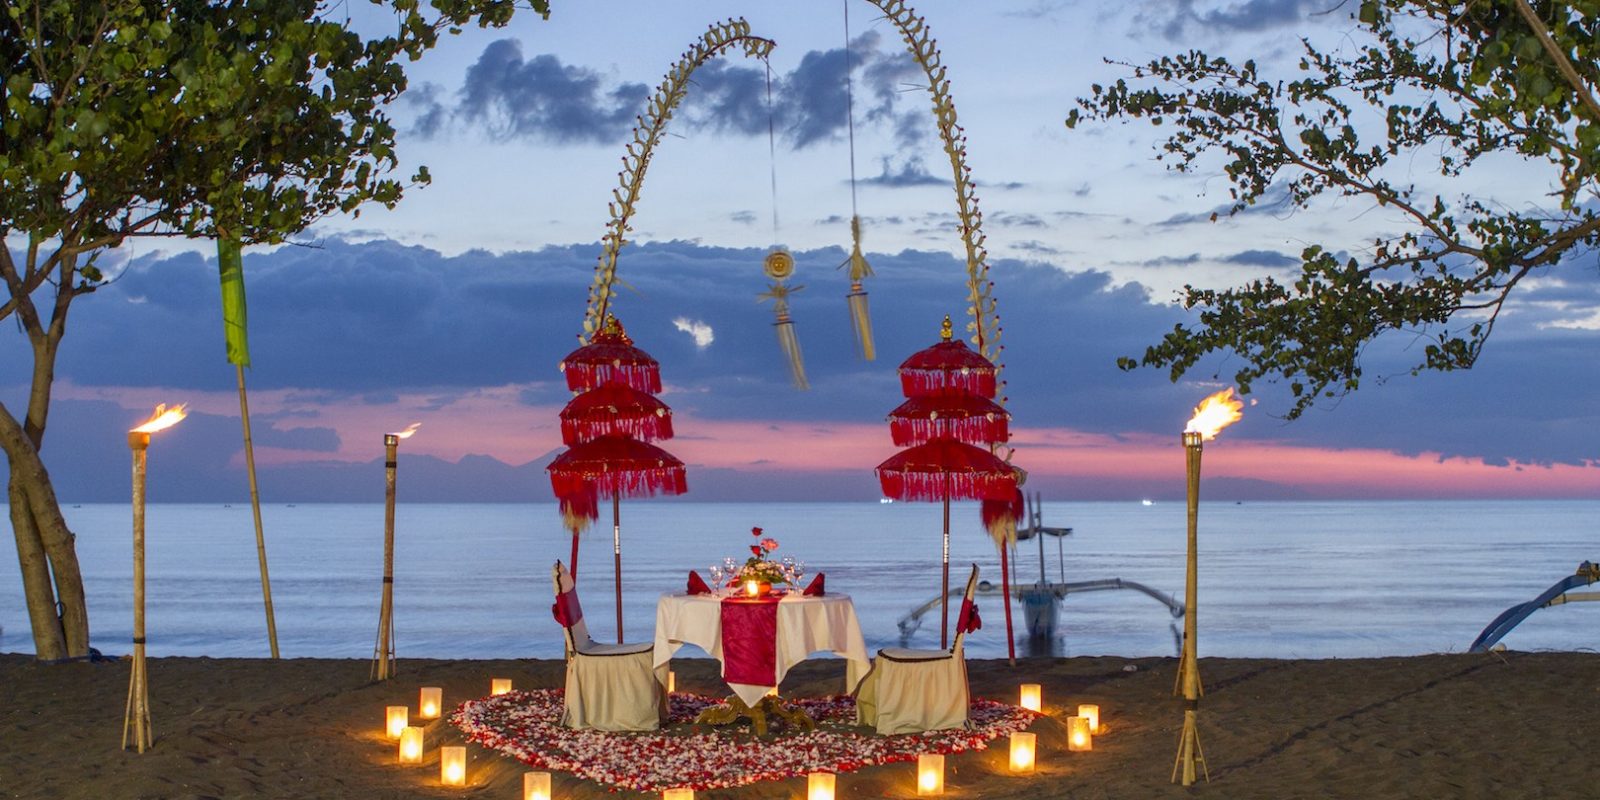 Candle-lit Dinner on the beach, Bali, Indonesia